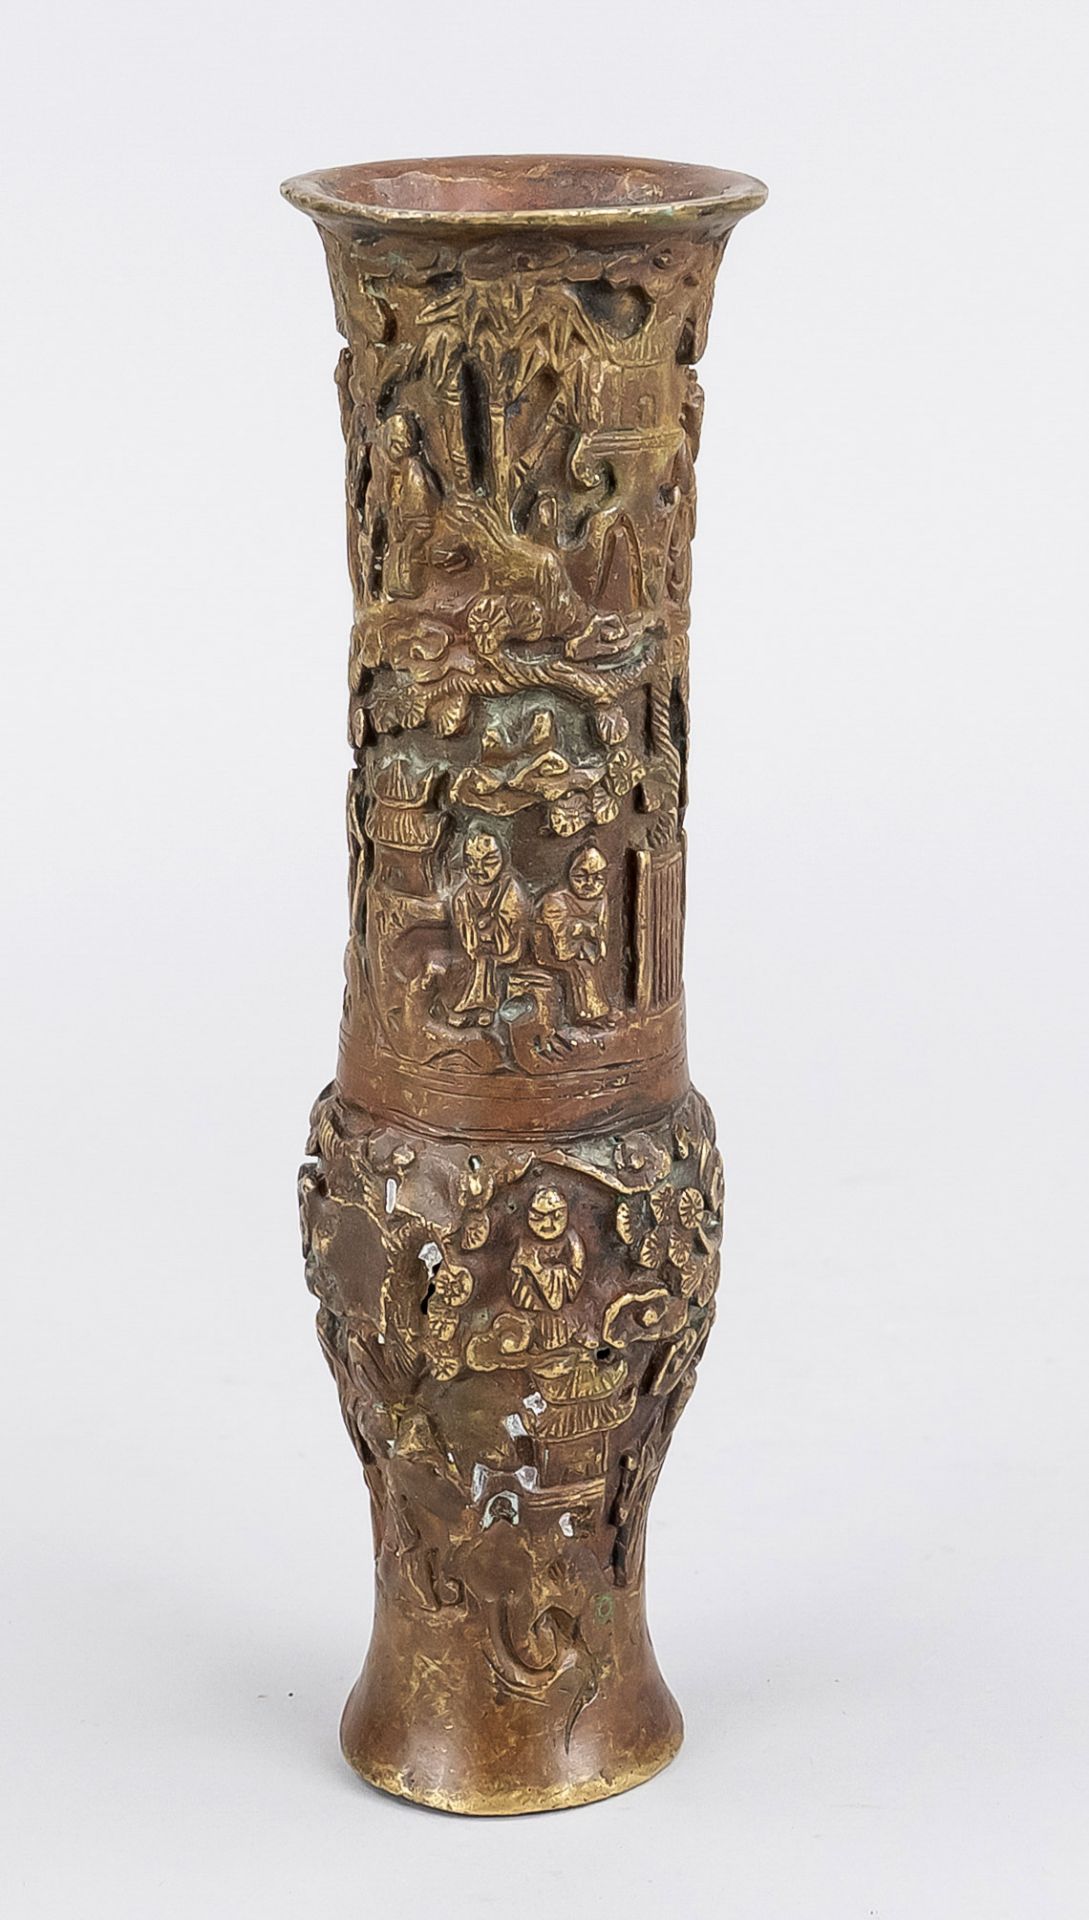 Bronze vase, China, Qing dynasty(1644-1911), 19th century, patinated bronze, cylindrical body with